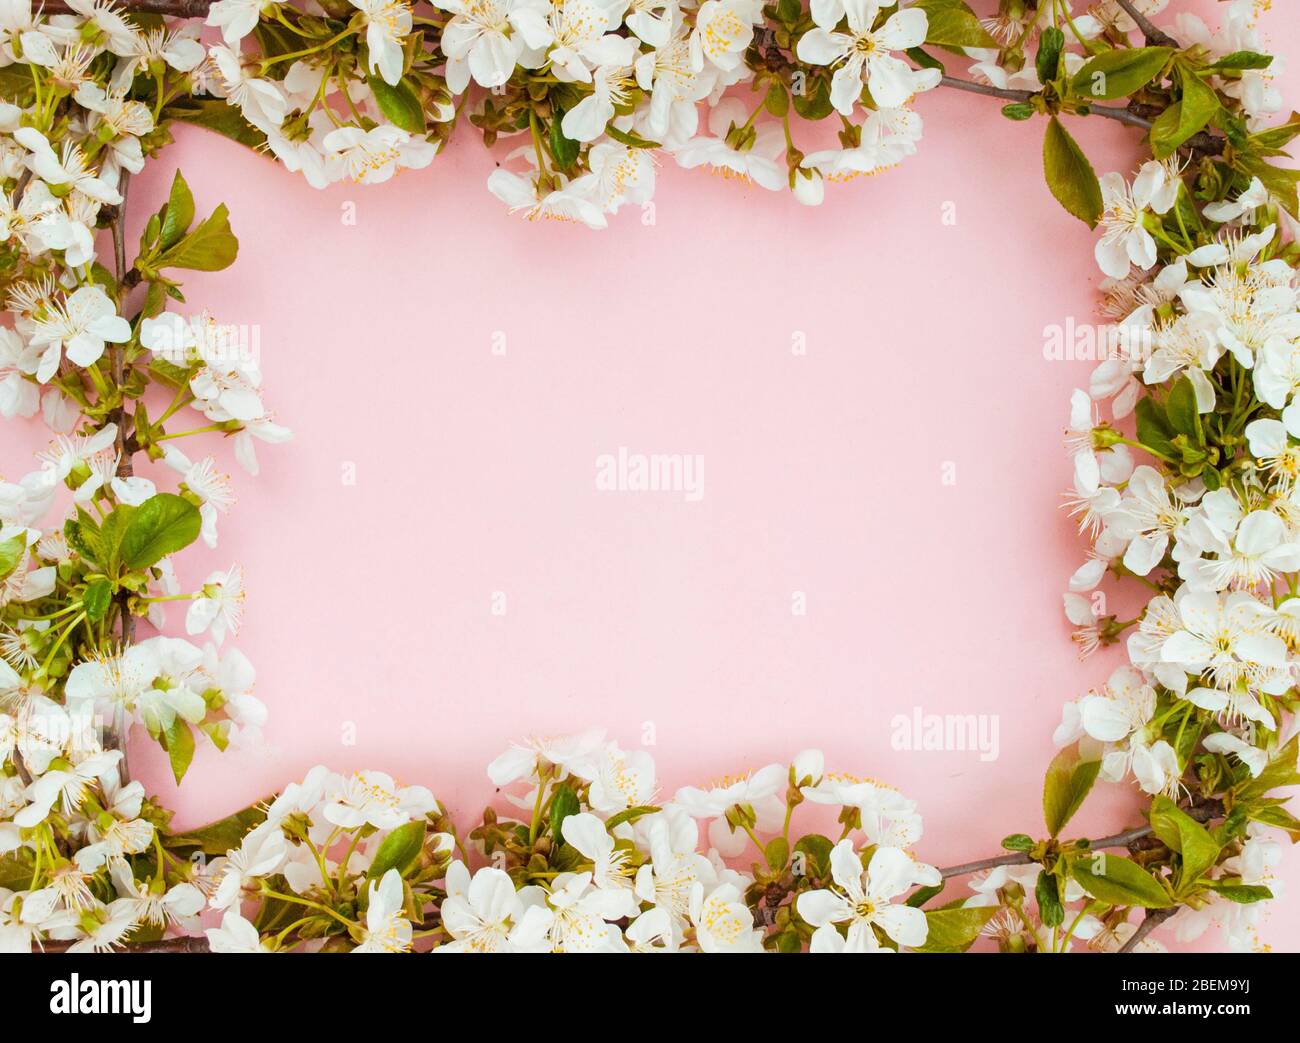 Frame of white spring flowers on a pink background, the beginning of spring. Place for text. Romantic mood. flat lay Stock Photo